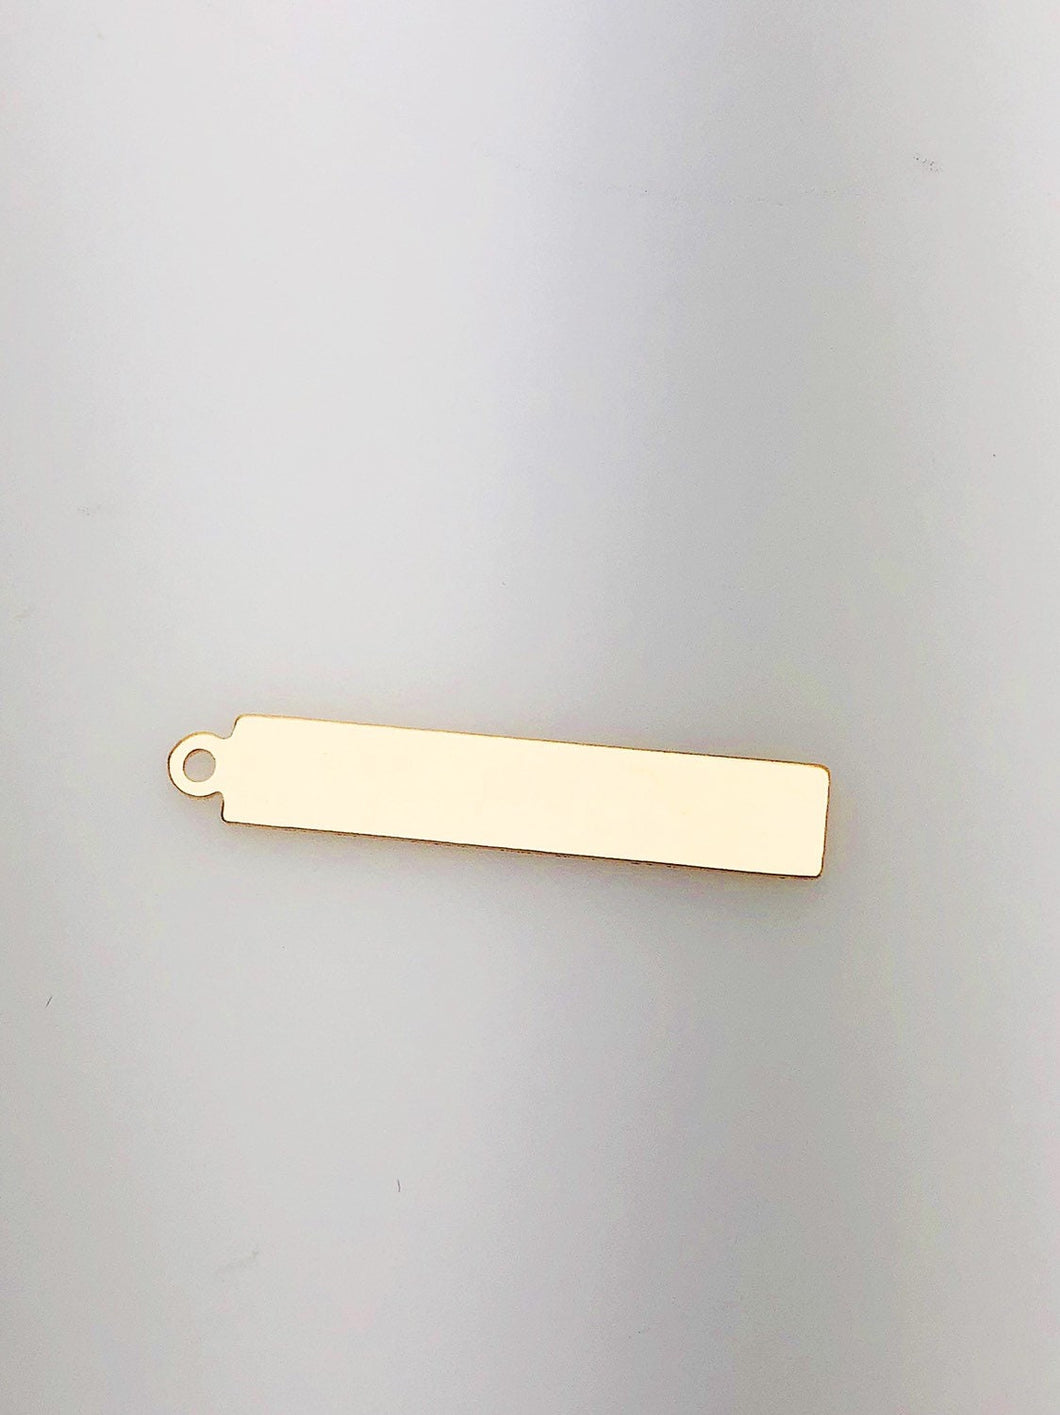 14K Gold Fill Bar Tag Charm w/ Ring, 32.0x6.1mm, Made in USA - 2637